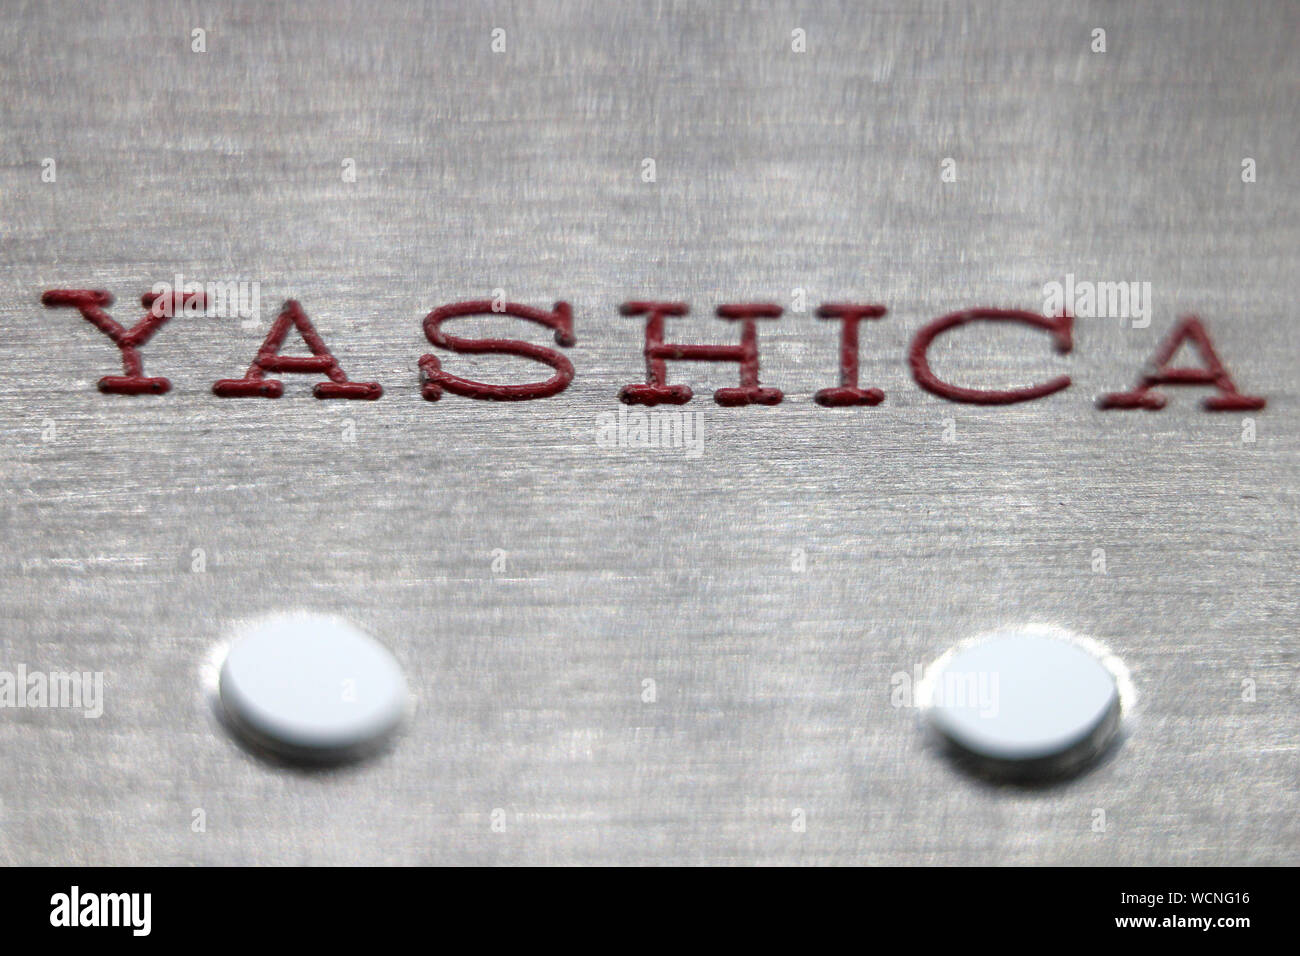 Yashica logo printed in super 8 movie editing splicer, isolated on white background, close-up Stock Photo